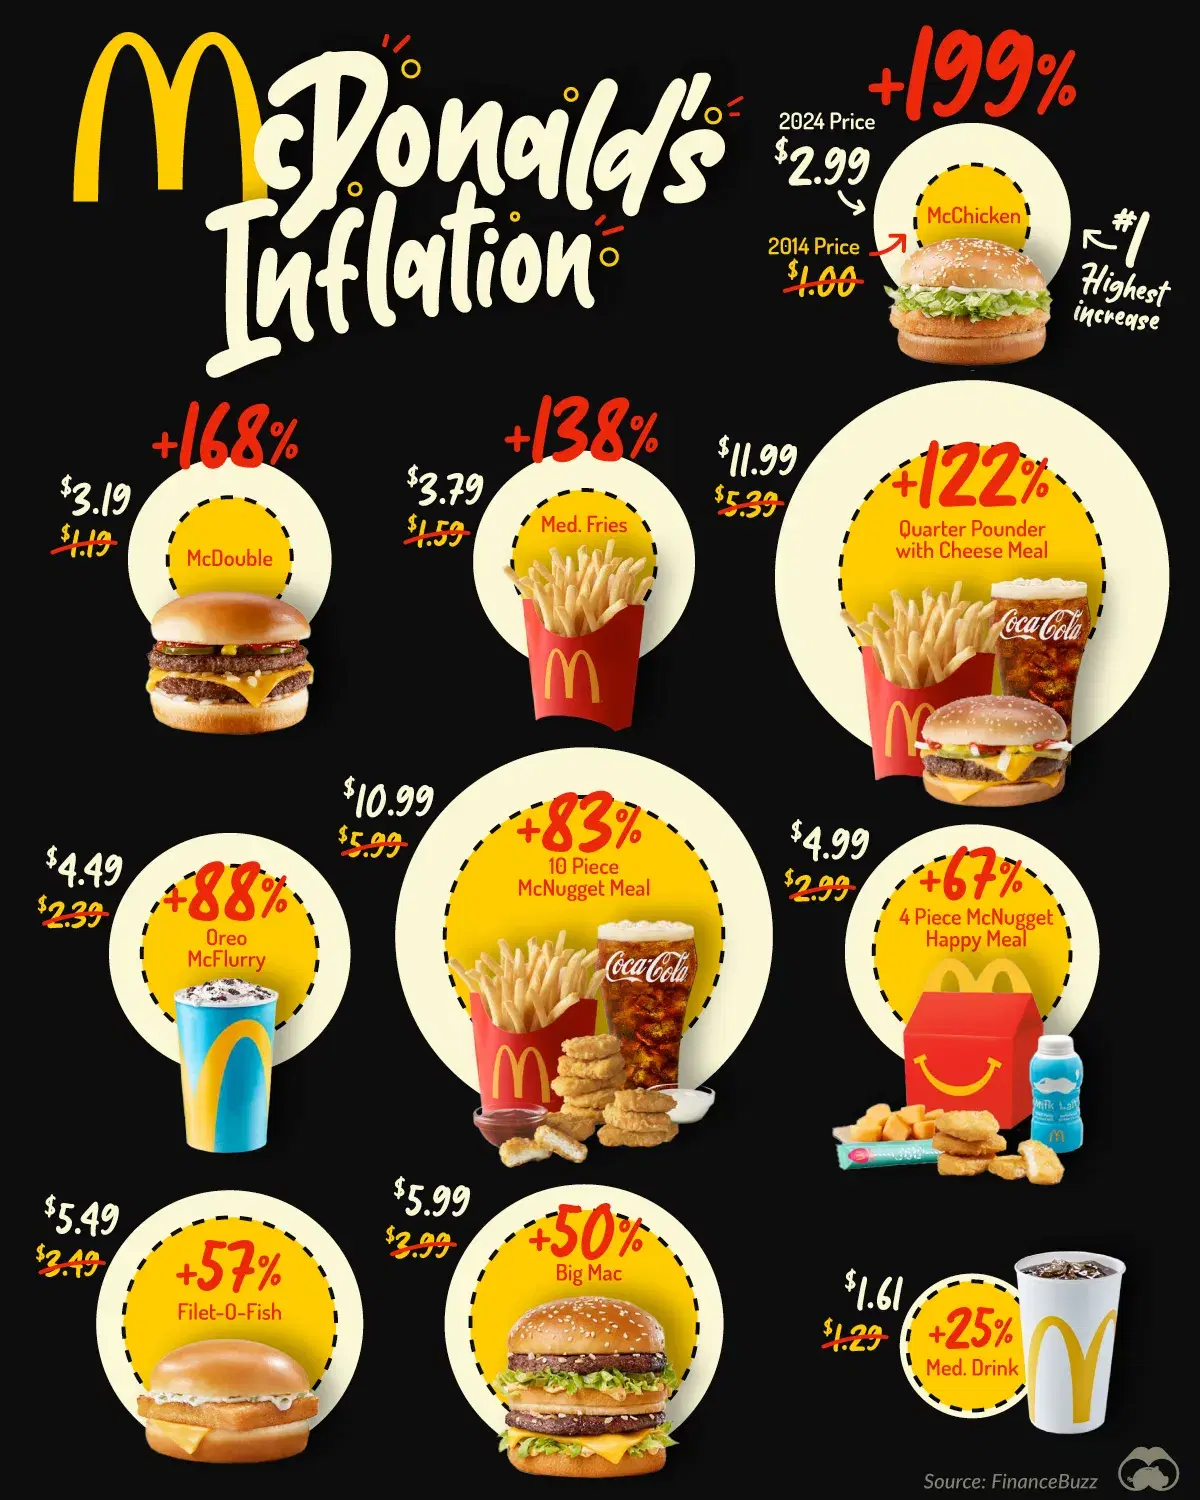 How Have McDonald's Prices Changed Since 2014?